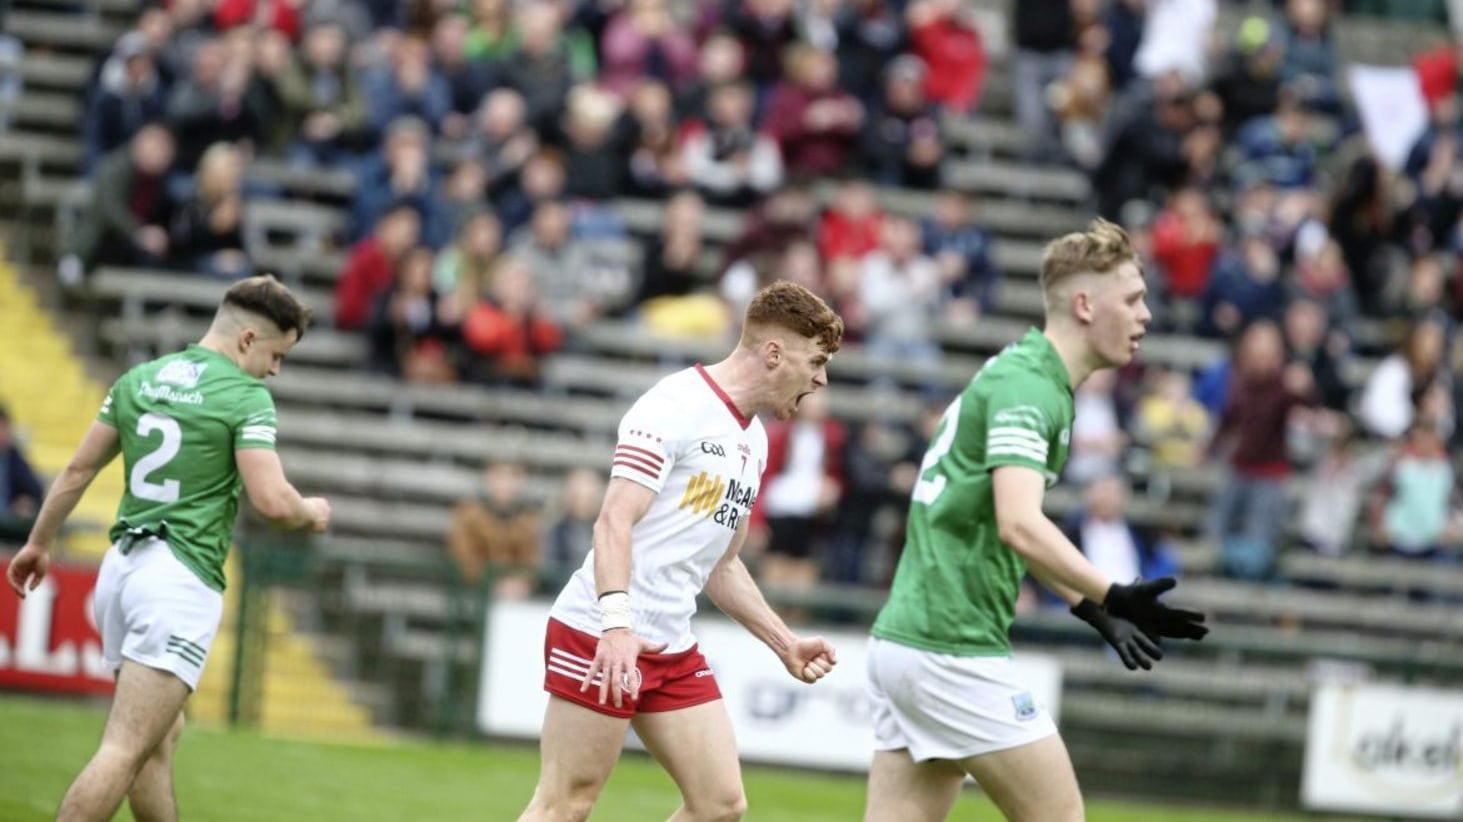 Darragh McGurn had a potential goal chance for Fermanagh on 32 minutes. Thirty seconds later, Conor Meyler had the ball in the net for Tyrone PictureL Philip Walsh. 